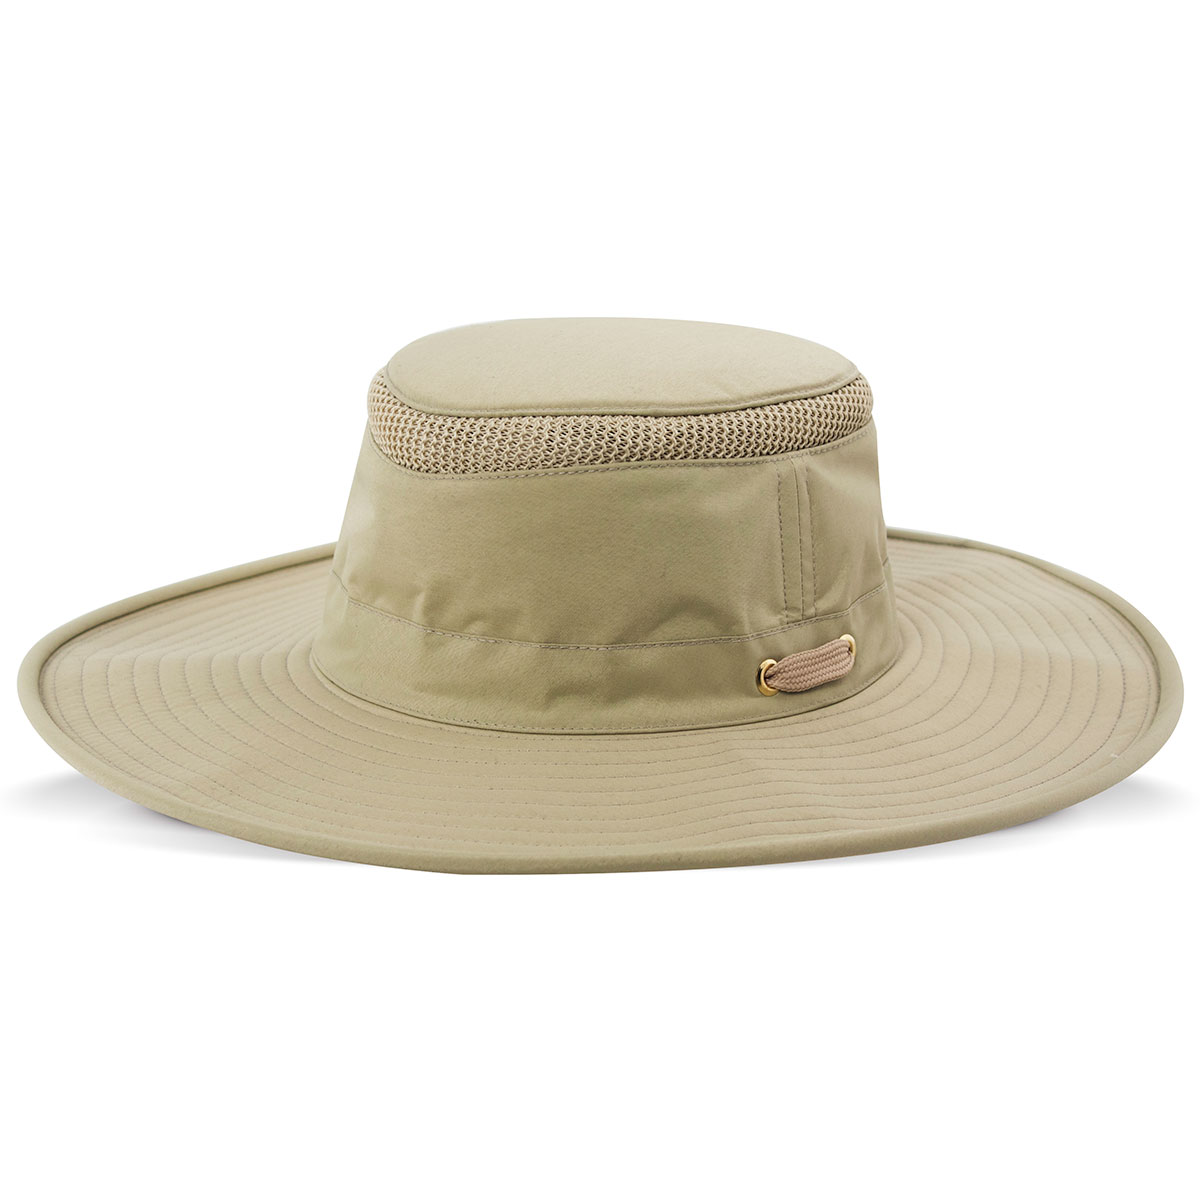 Airflo® Lightweight Vented Wide Brim Outback